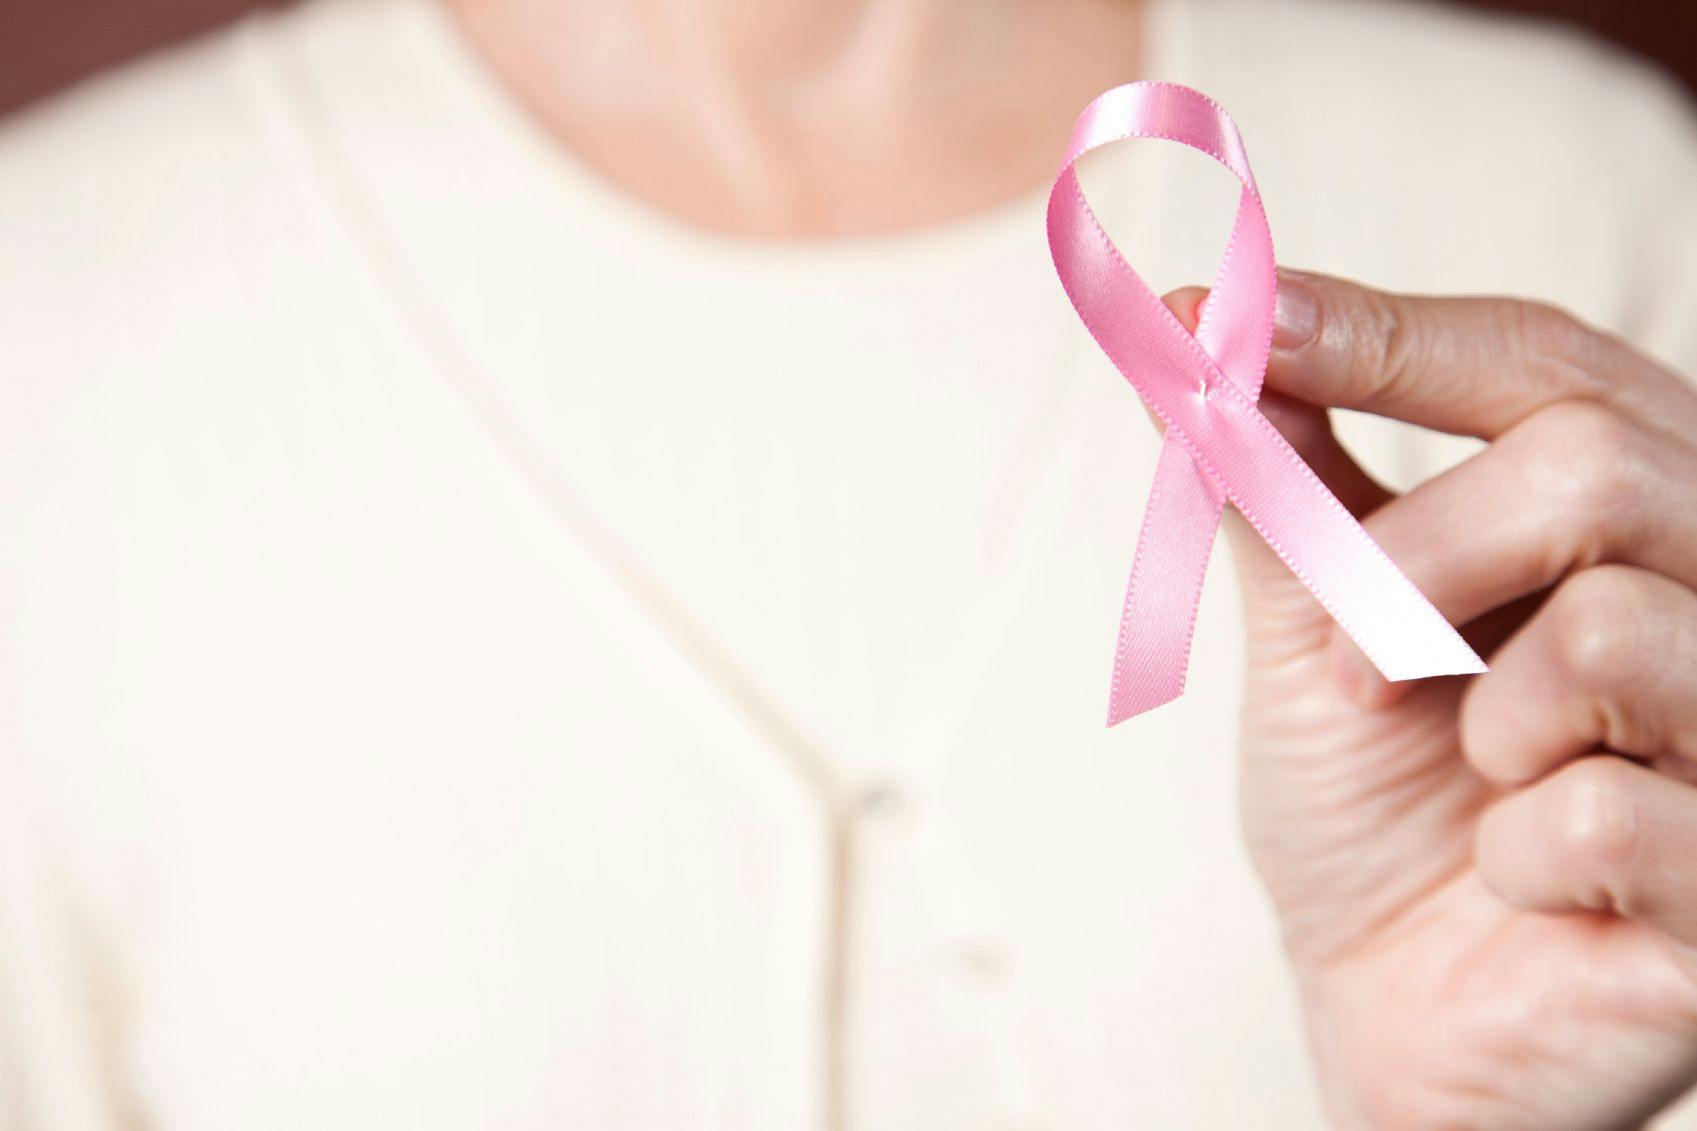 CDC Cancer Screening Program Aids Millions of Women with Limited Health Care Access